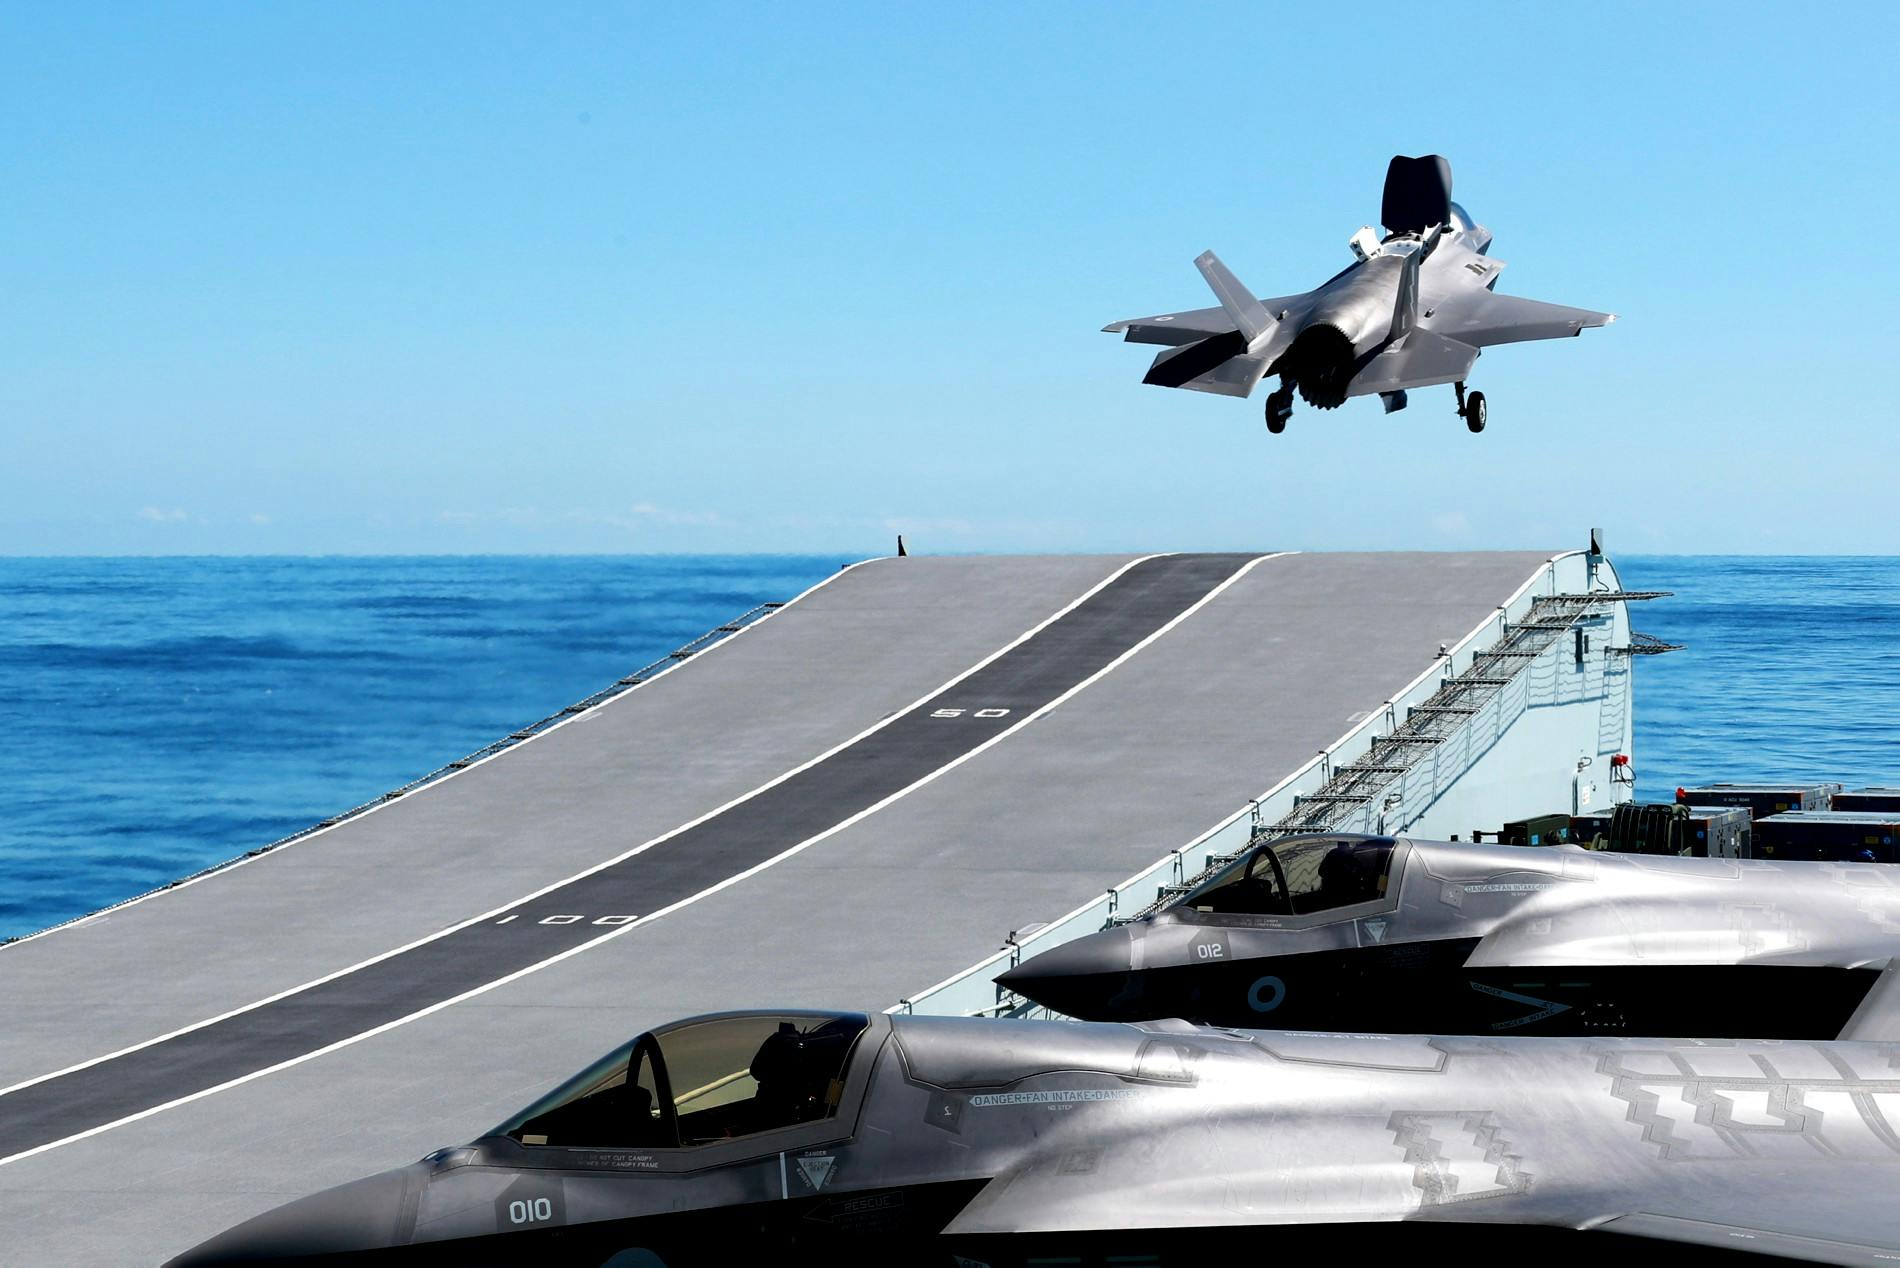 Jets embark on British aircraft carrier ahead of deployment